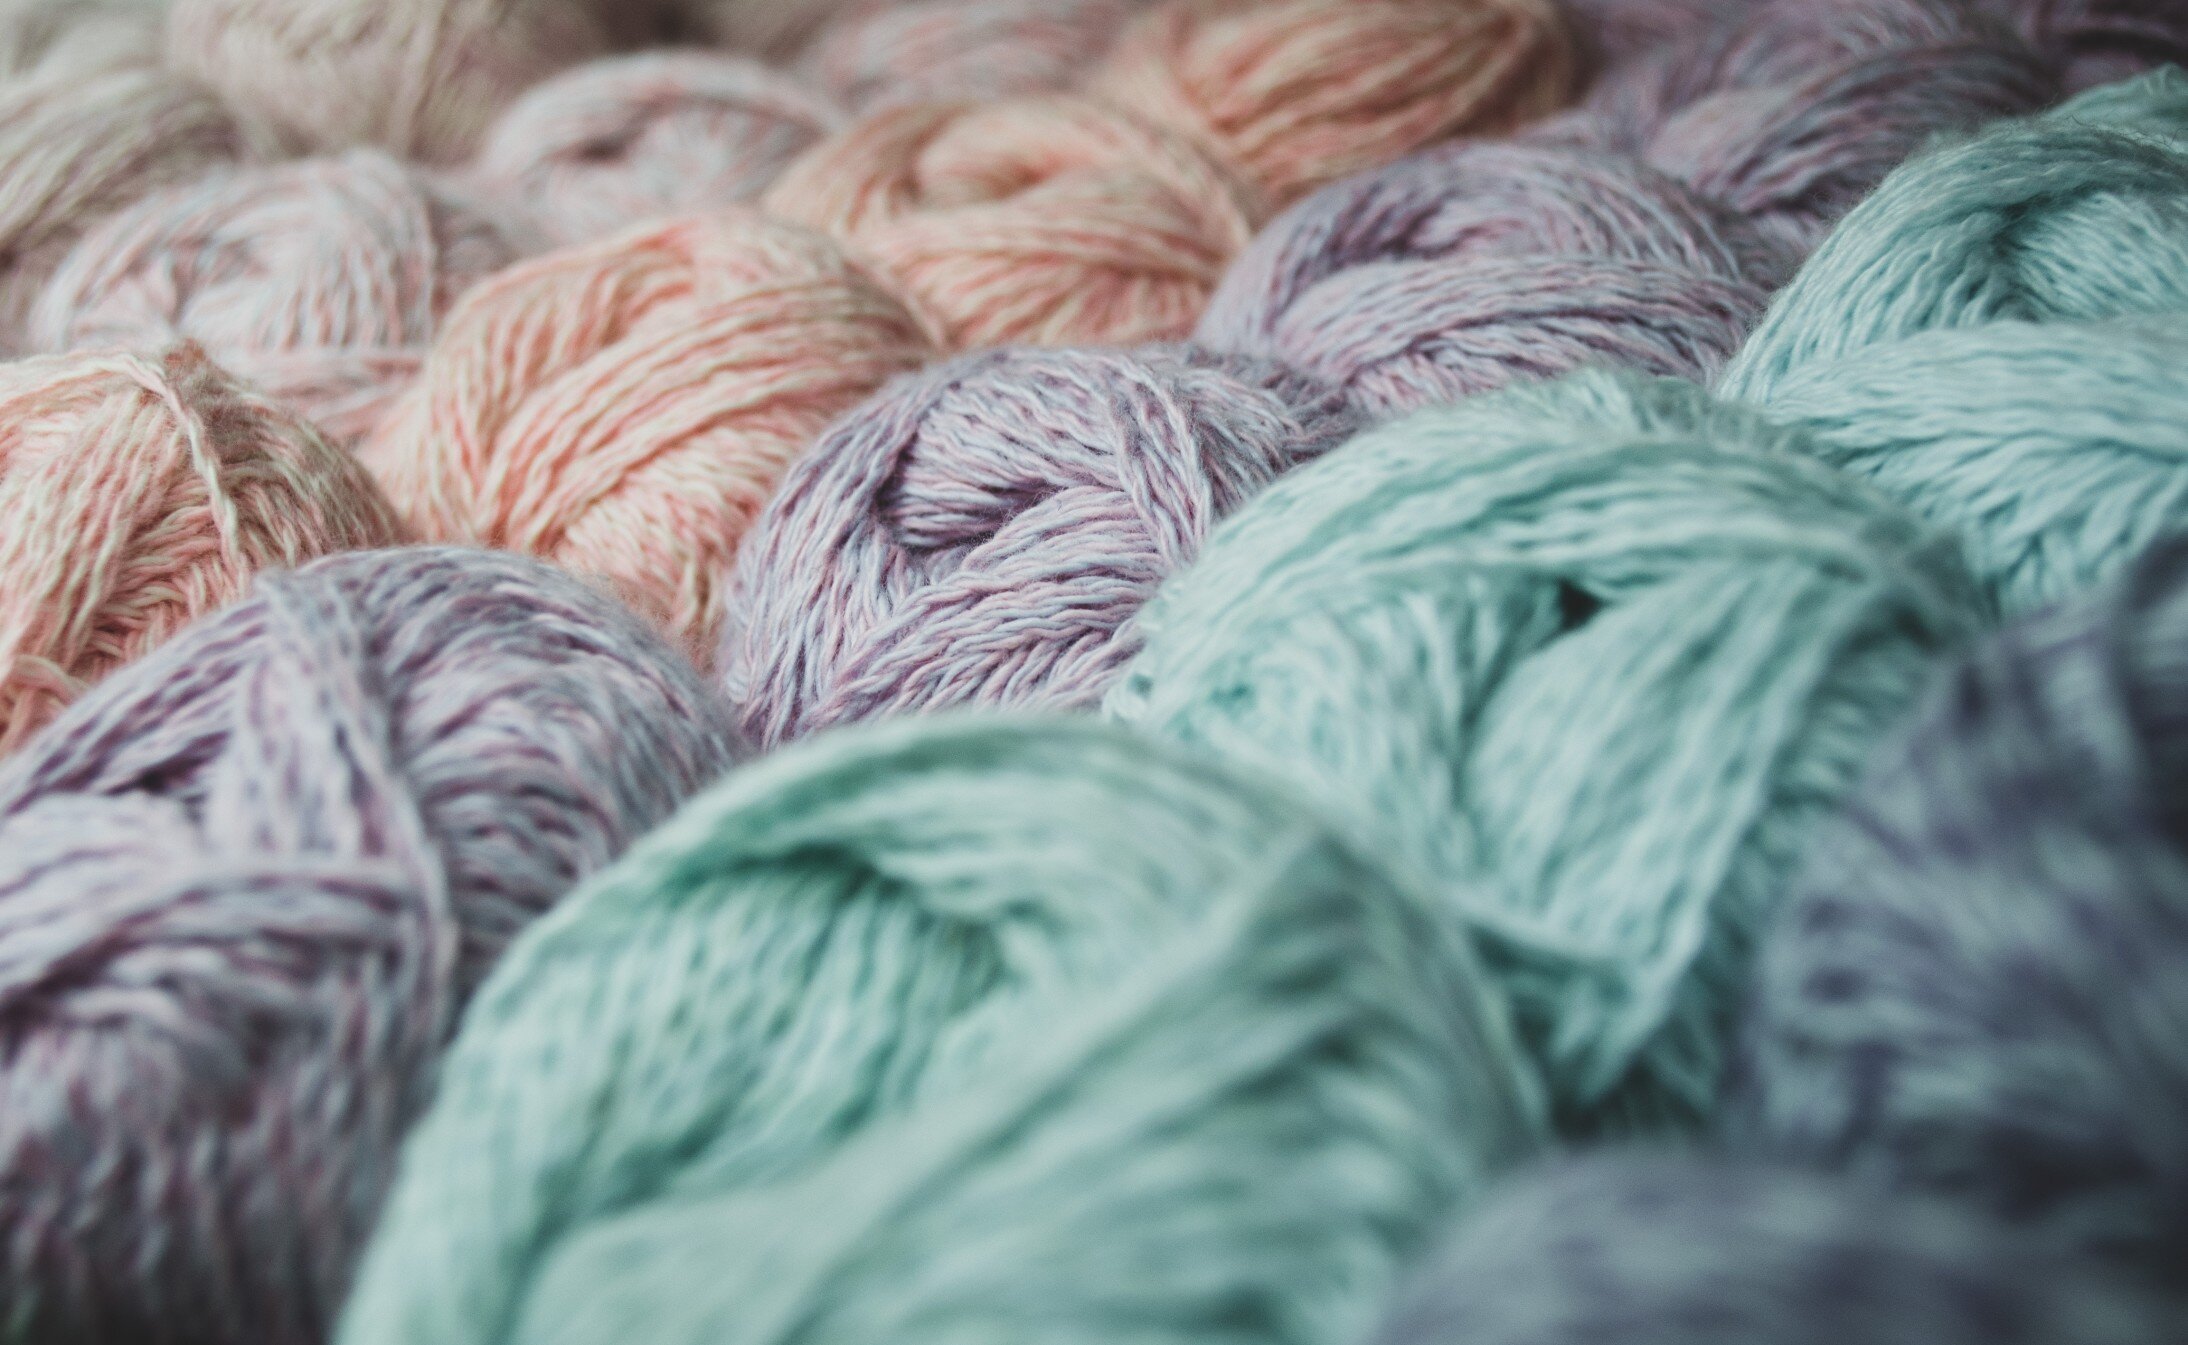 close-up-of-skeins-of-lilac-pink-thread-around-blurred-skeins-of-pastel-colors-of-green-and-blue_t20_O0wwob.jpg